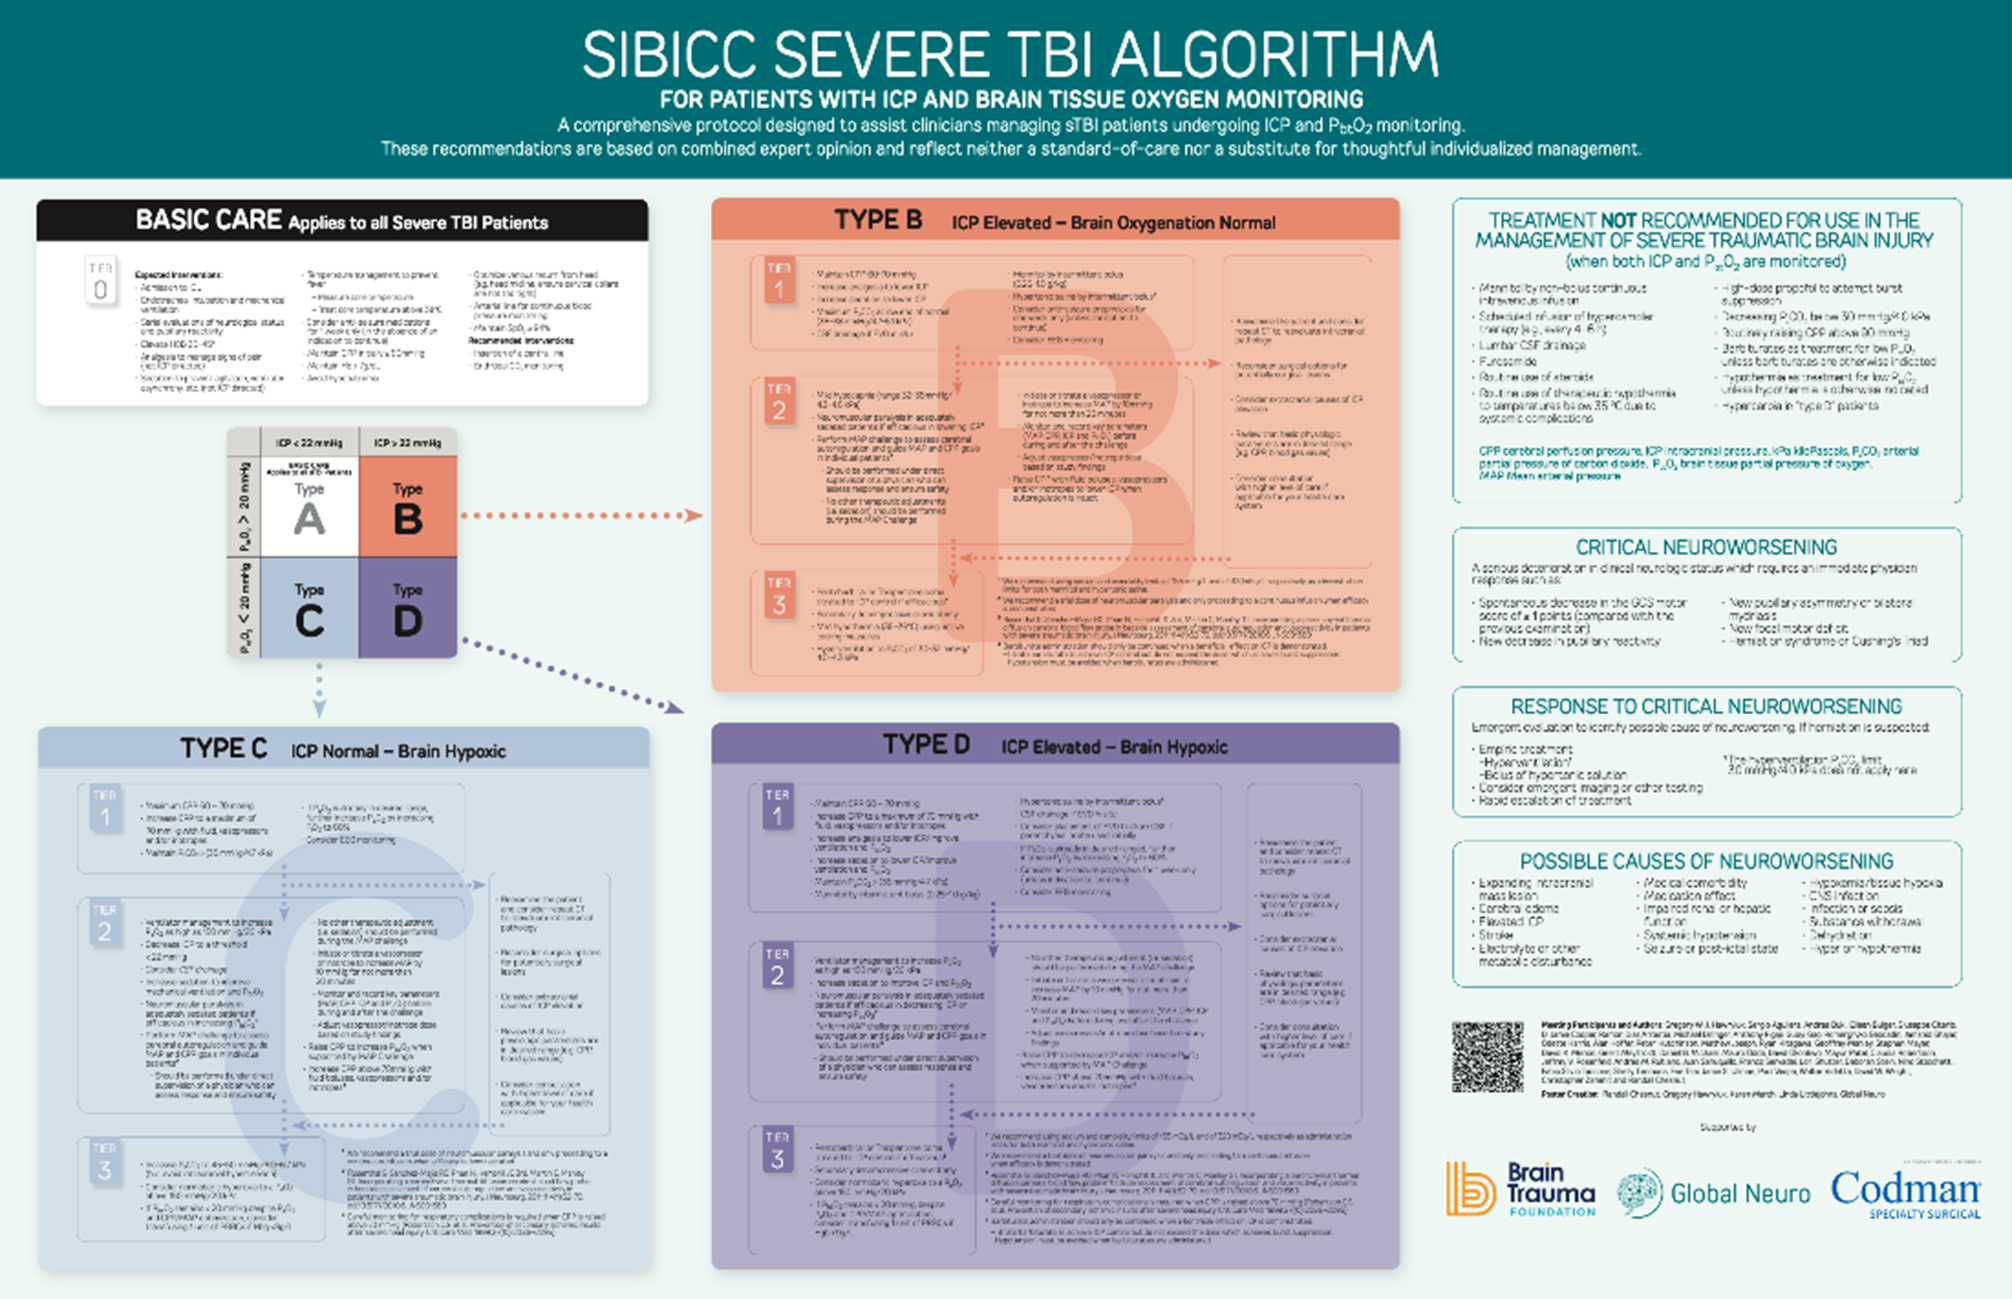 SIBICC severe TBI algorithm for patients with ICP and brain tissue monitoring